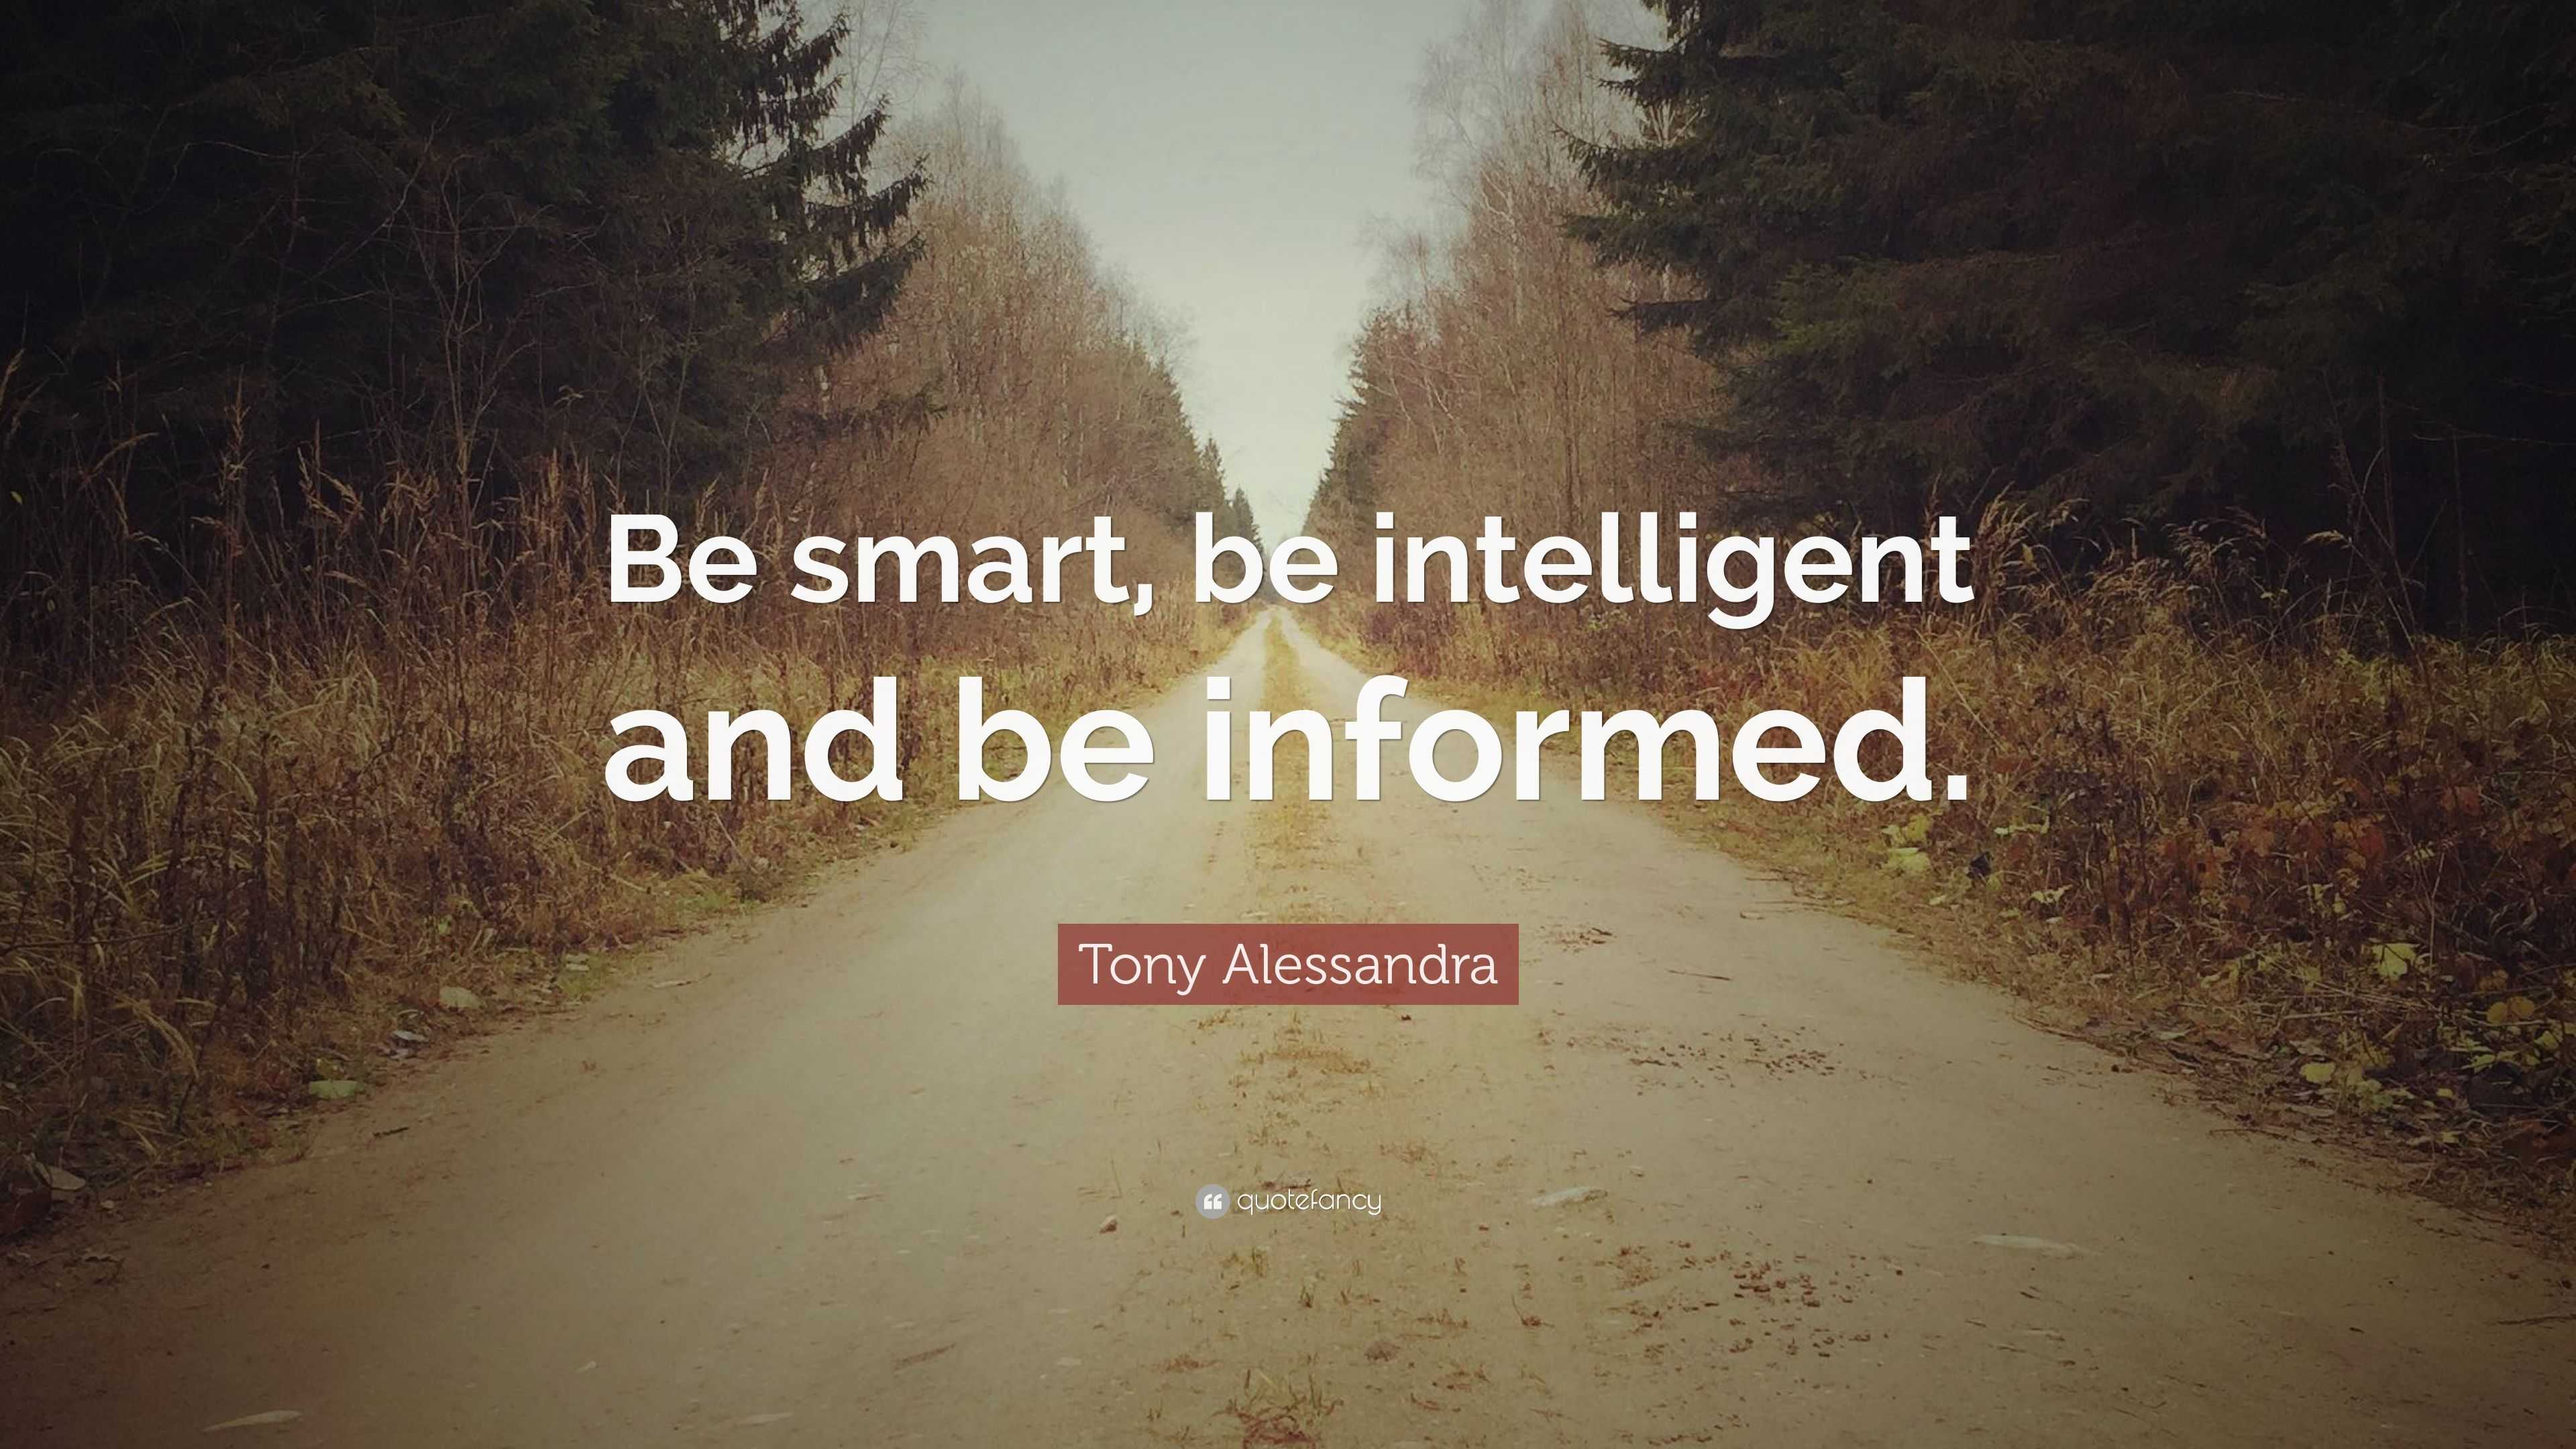 Tony Alessandra Quote “Be smart, be intelligent and be